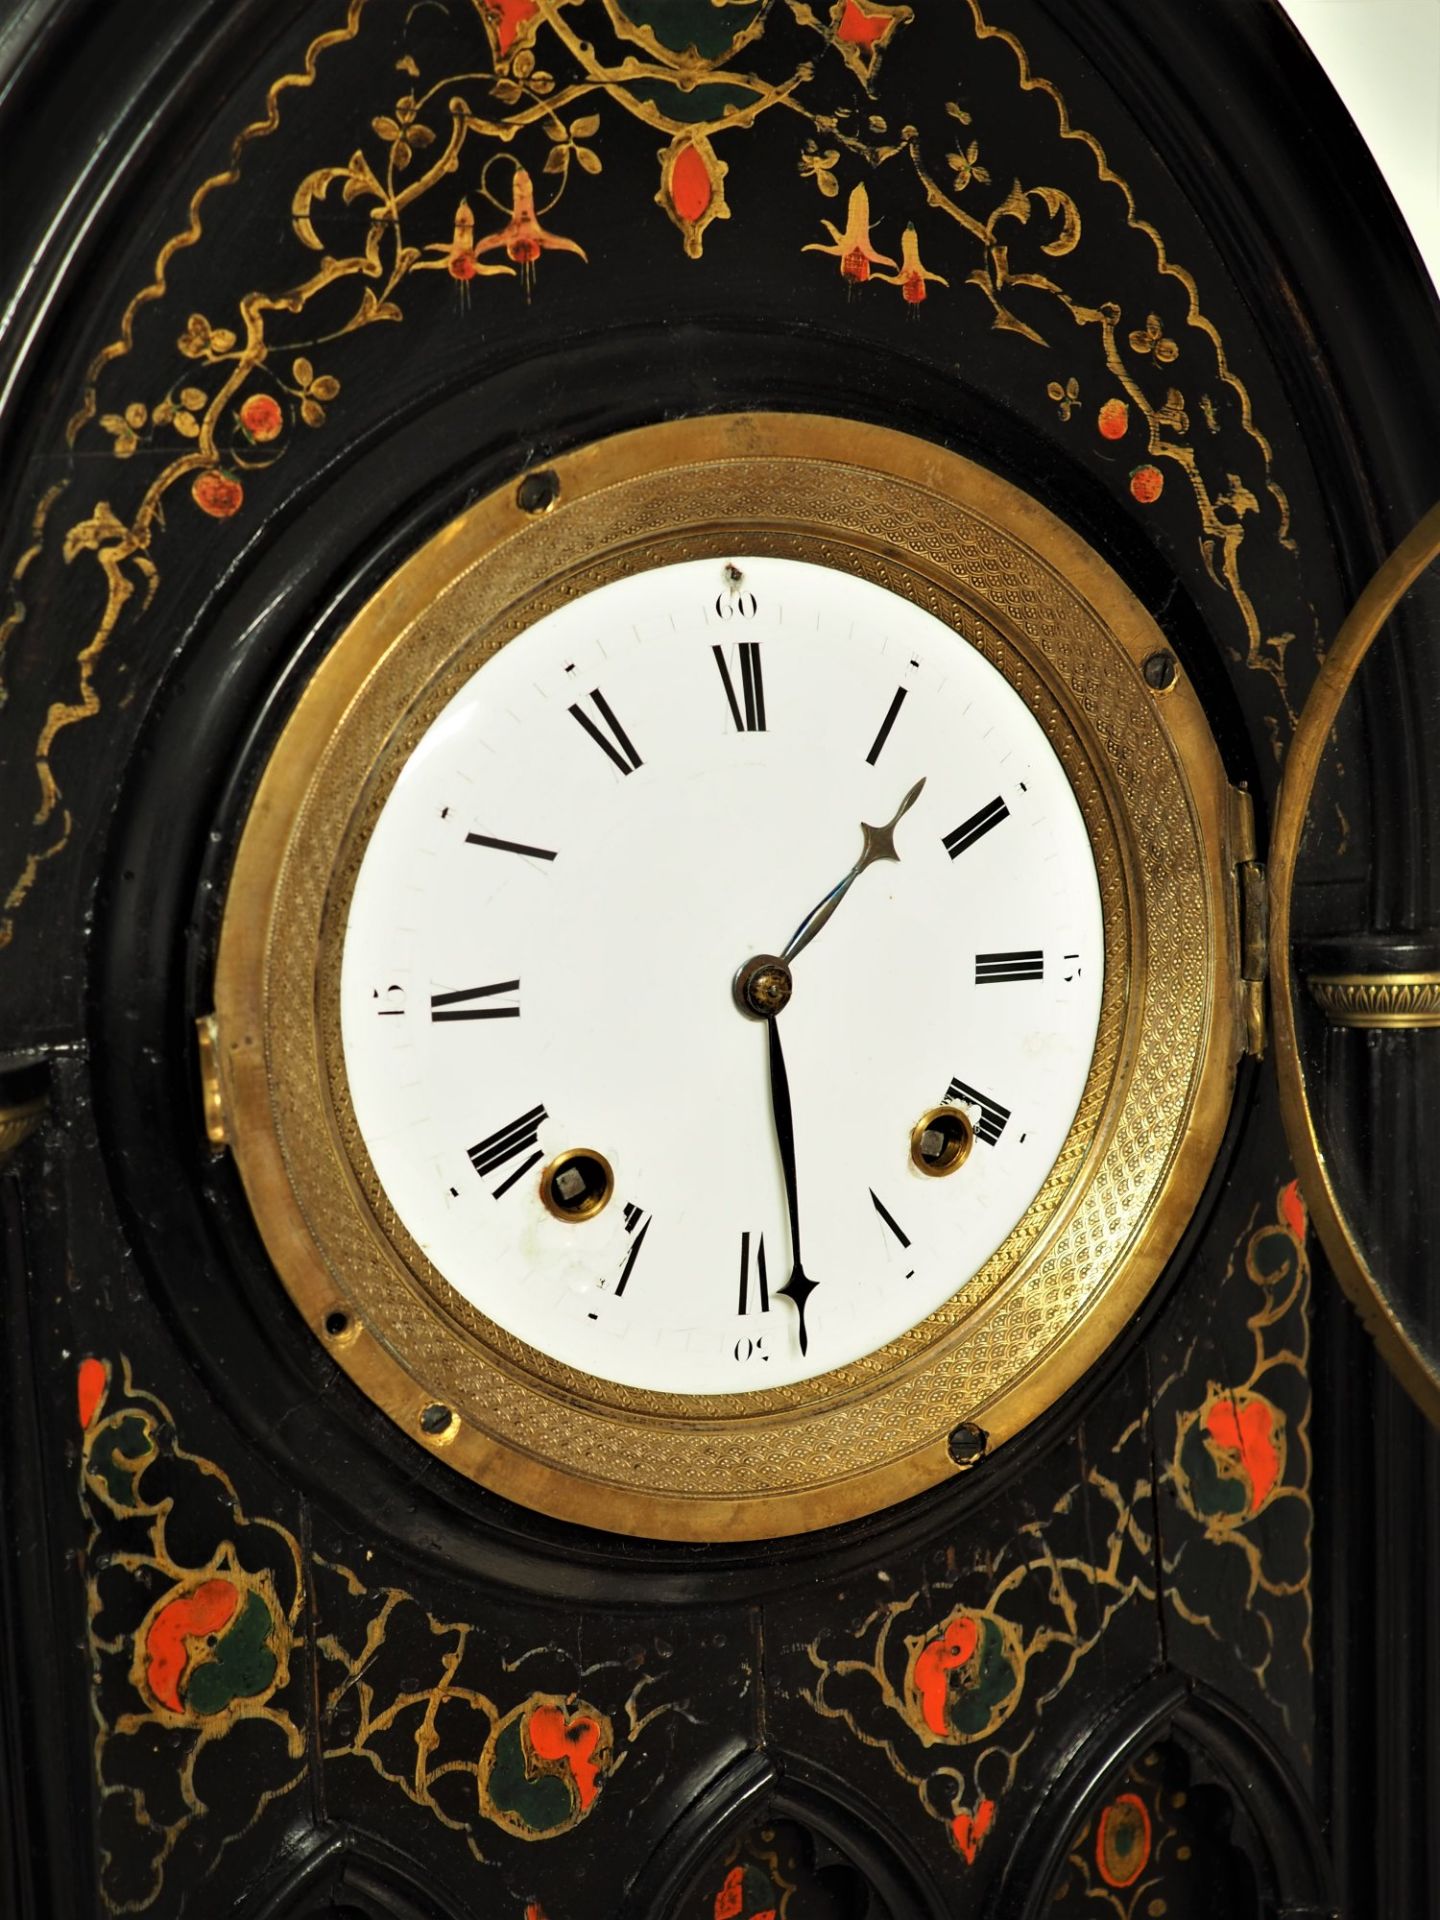 Viennese cathedral clock, around 1850. - Image 3 of 4